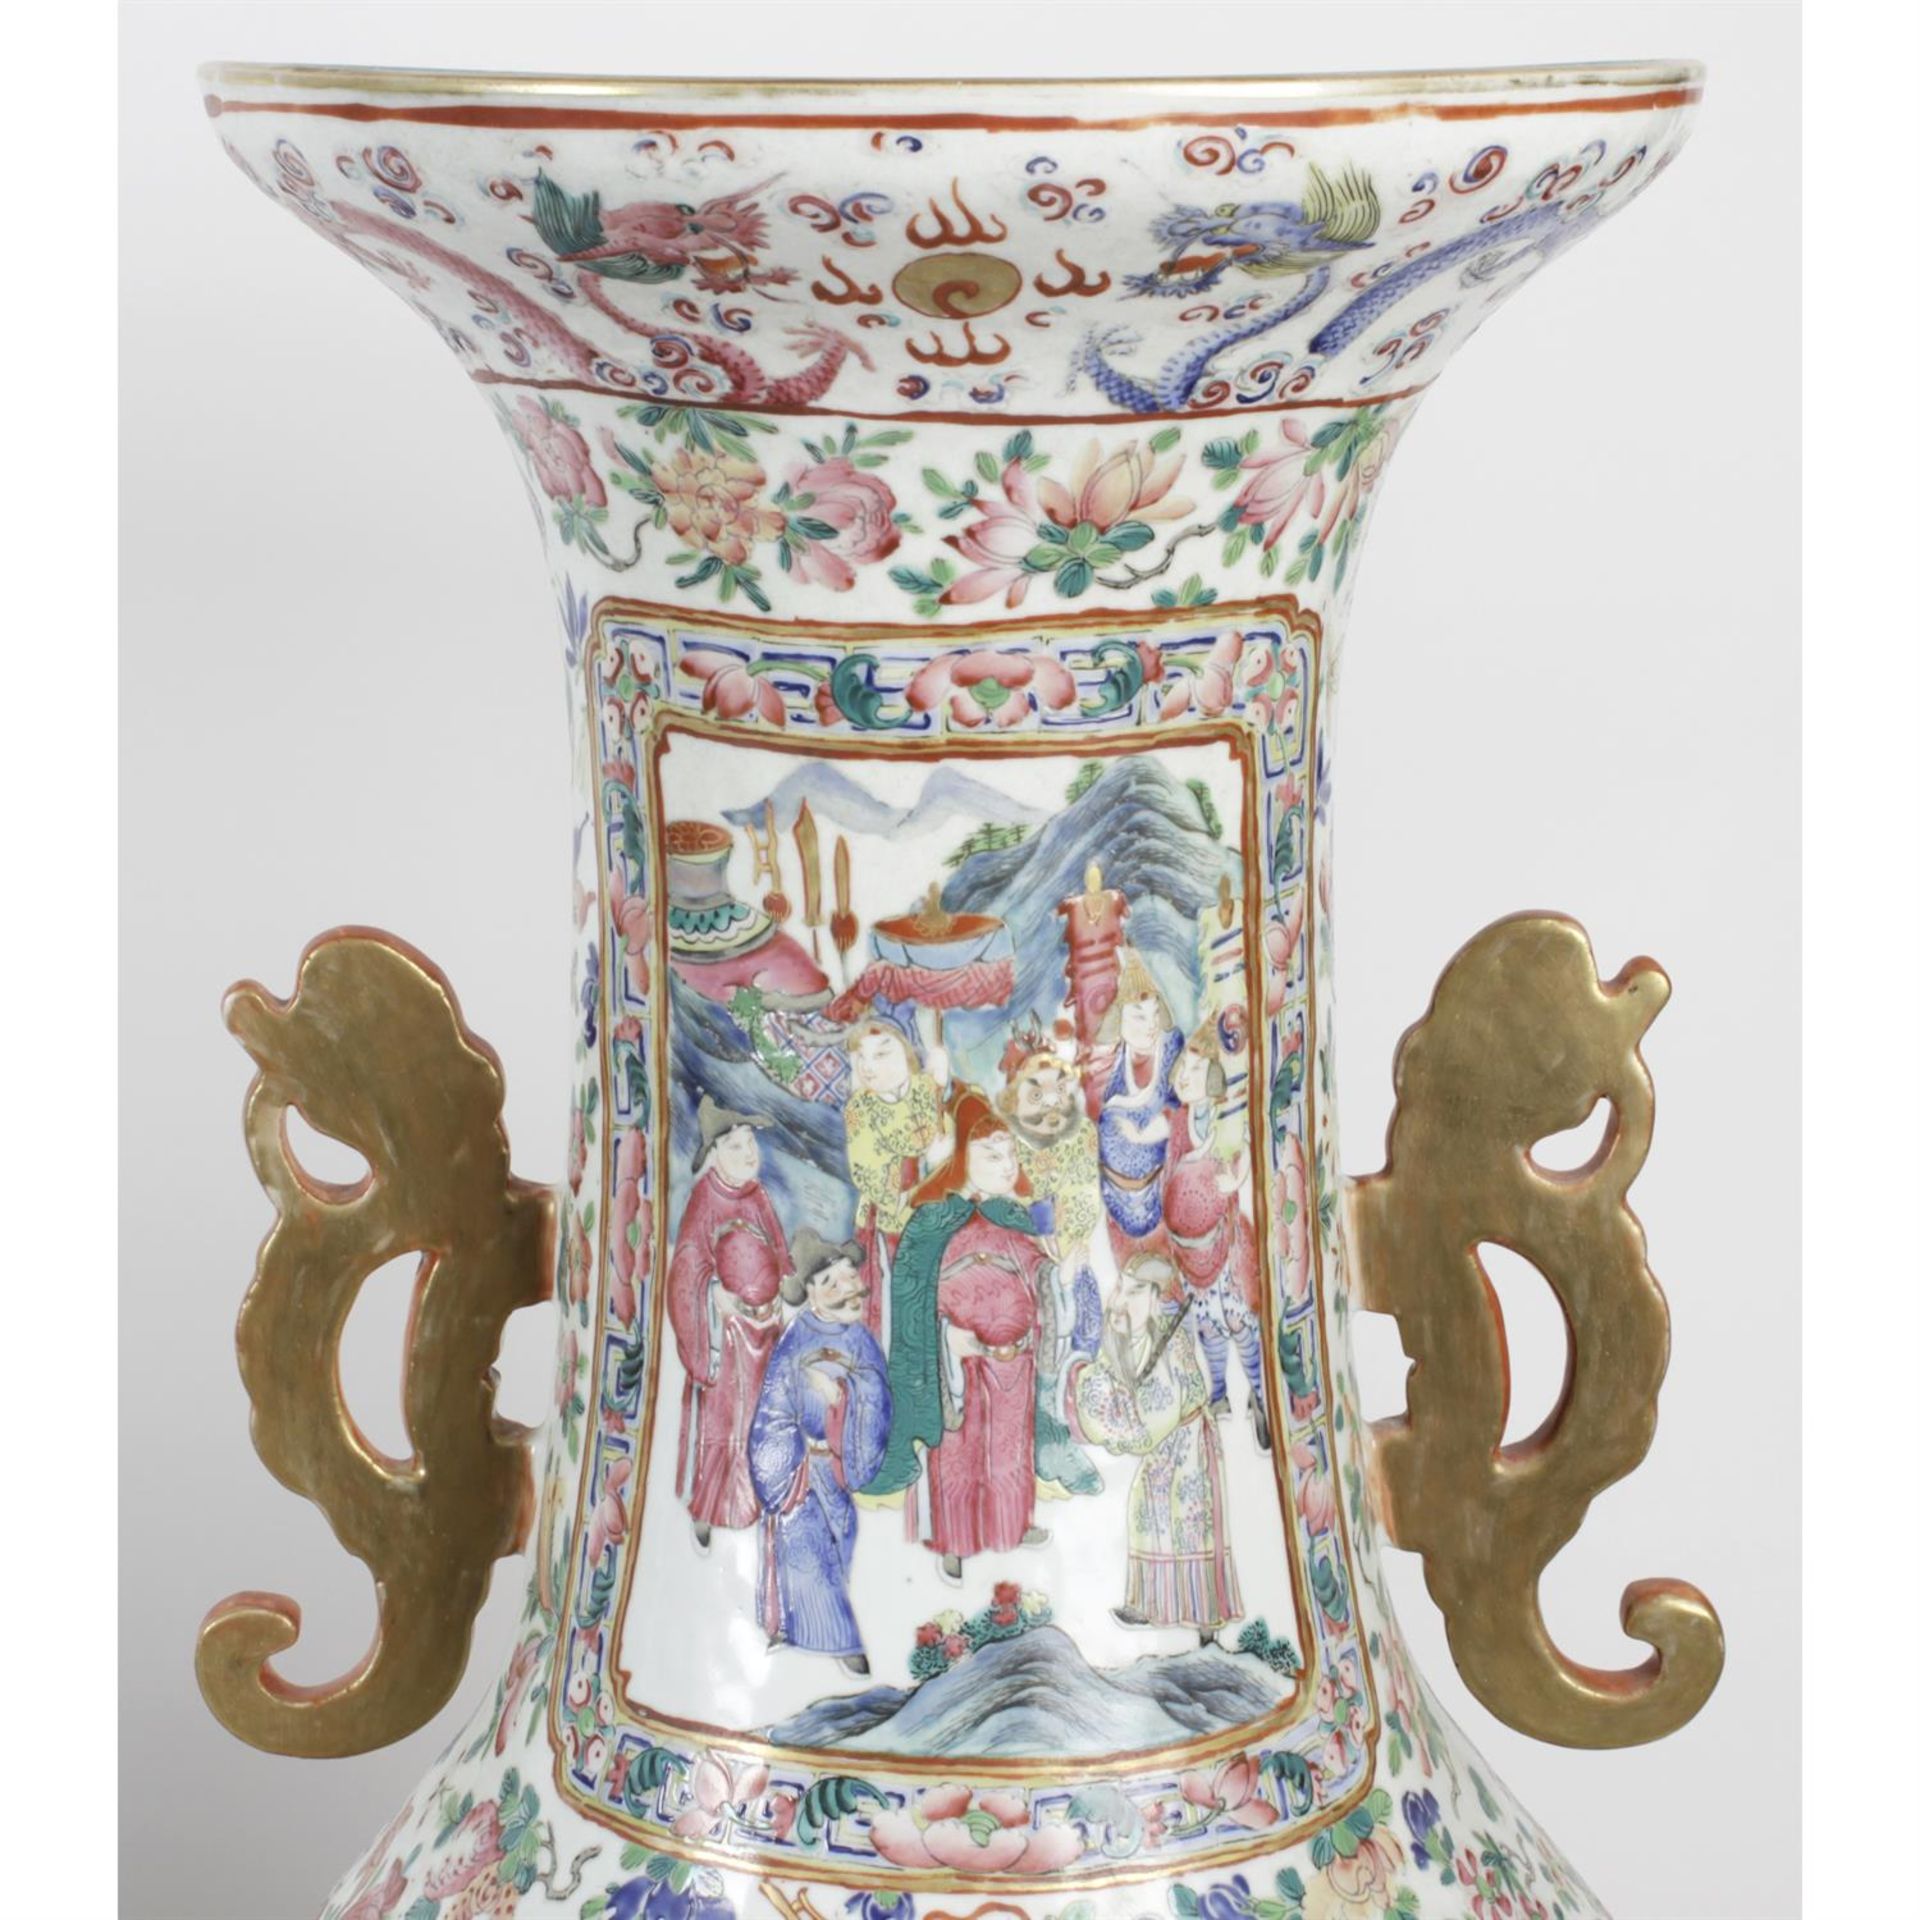 A pair of impressive, large mid-19th century Cantonese porcelain vases. - Image 8 of 20